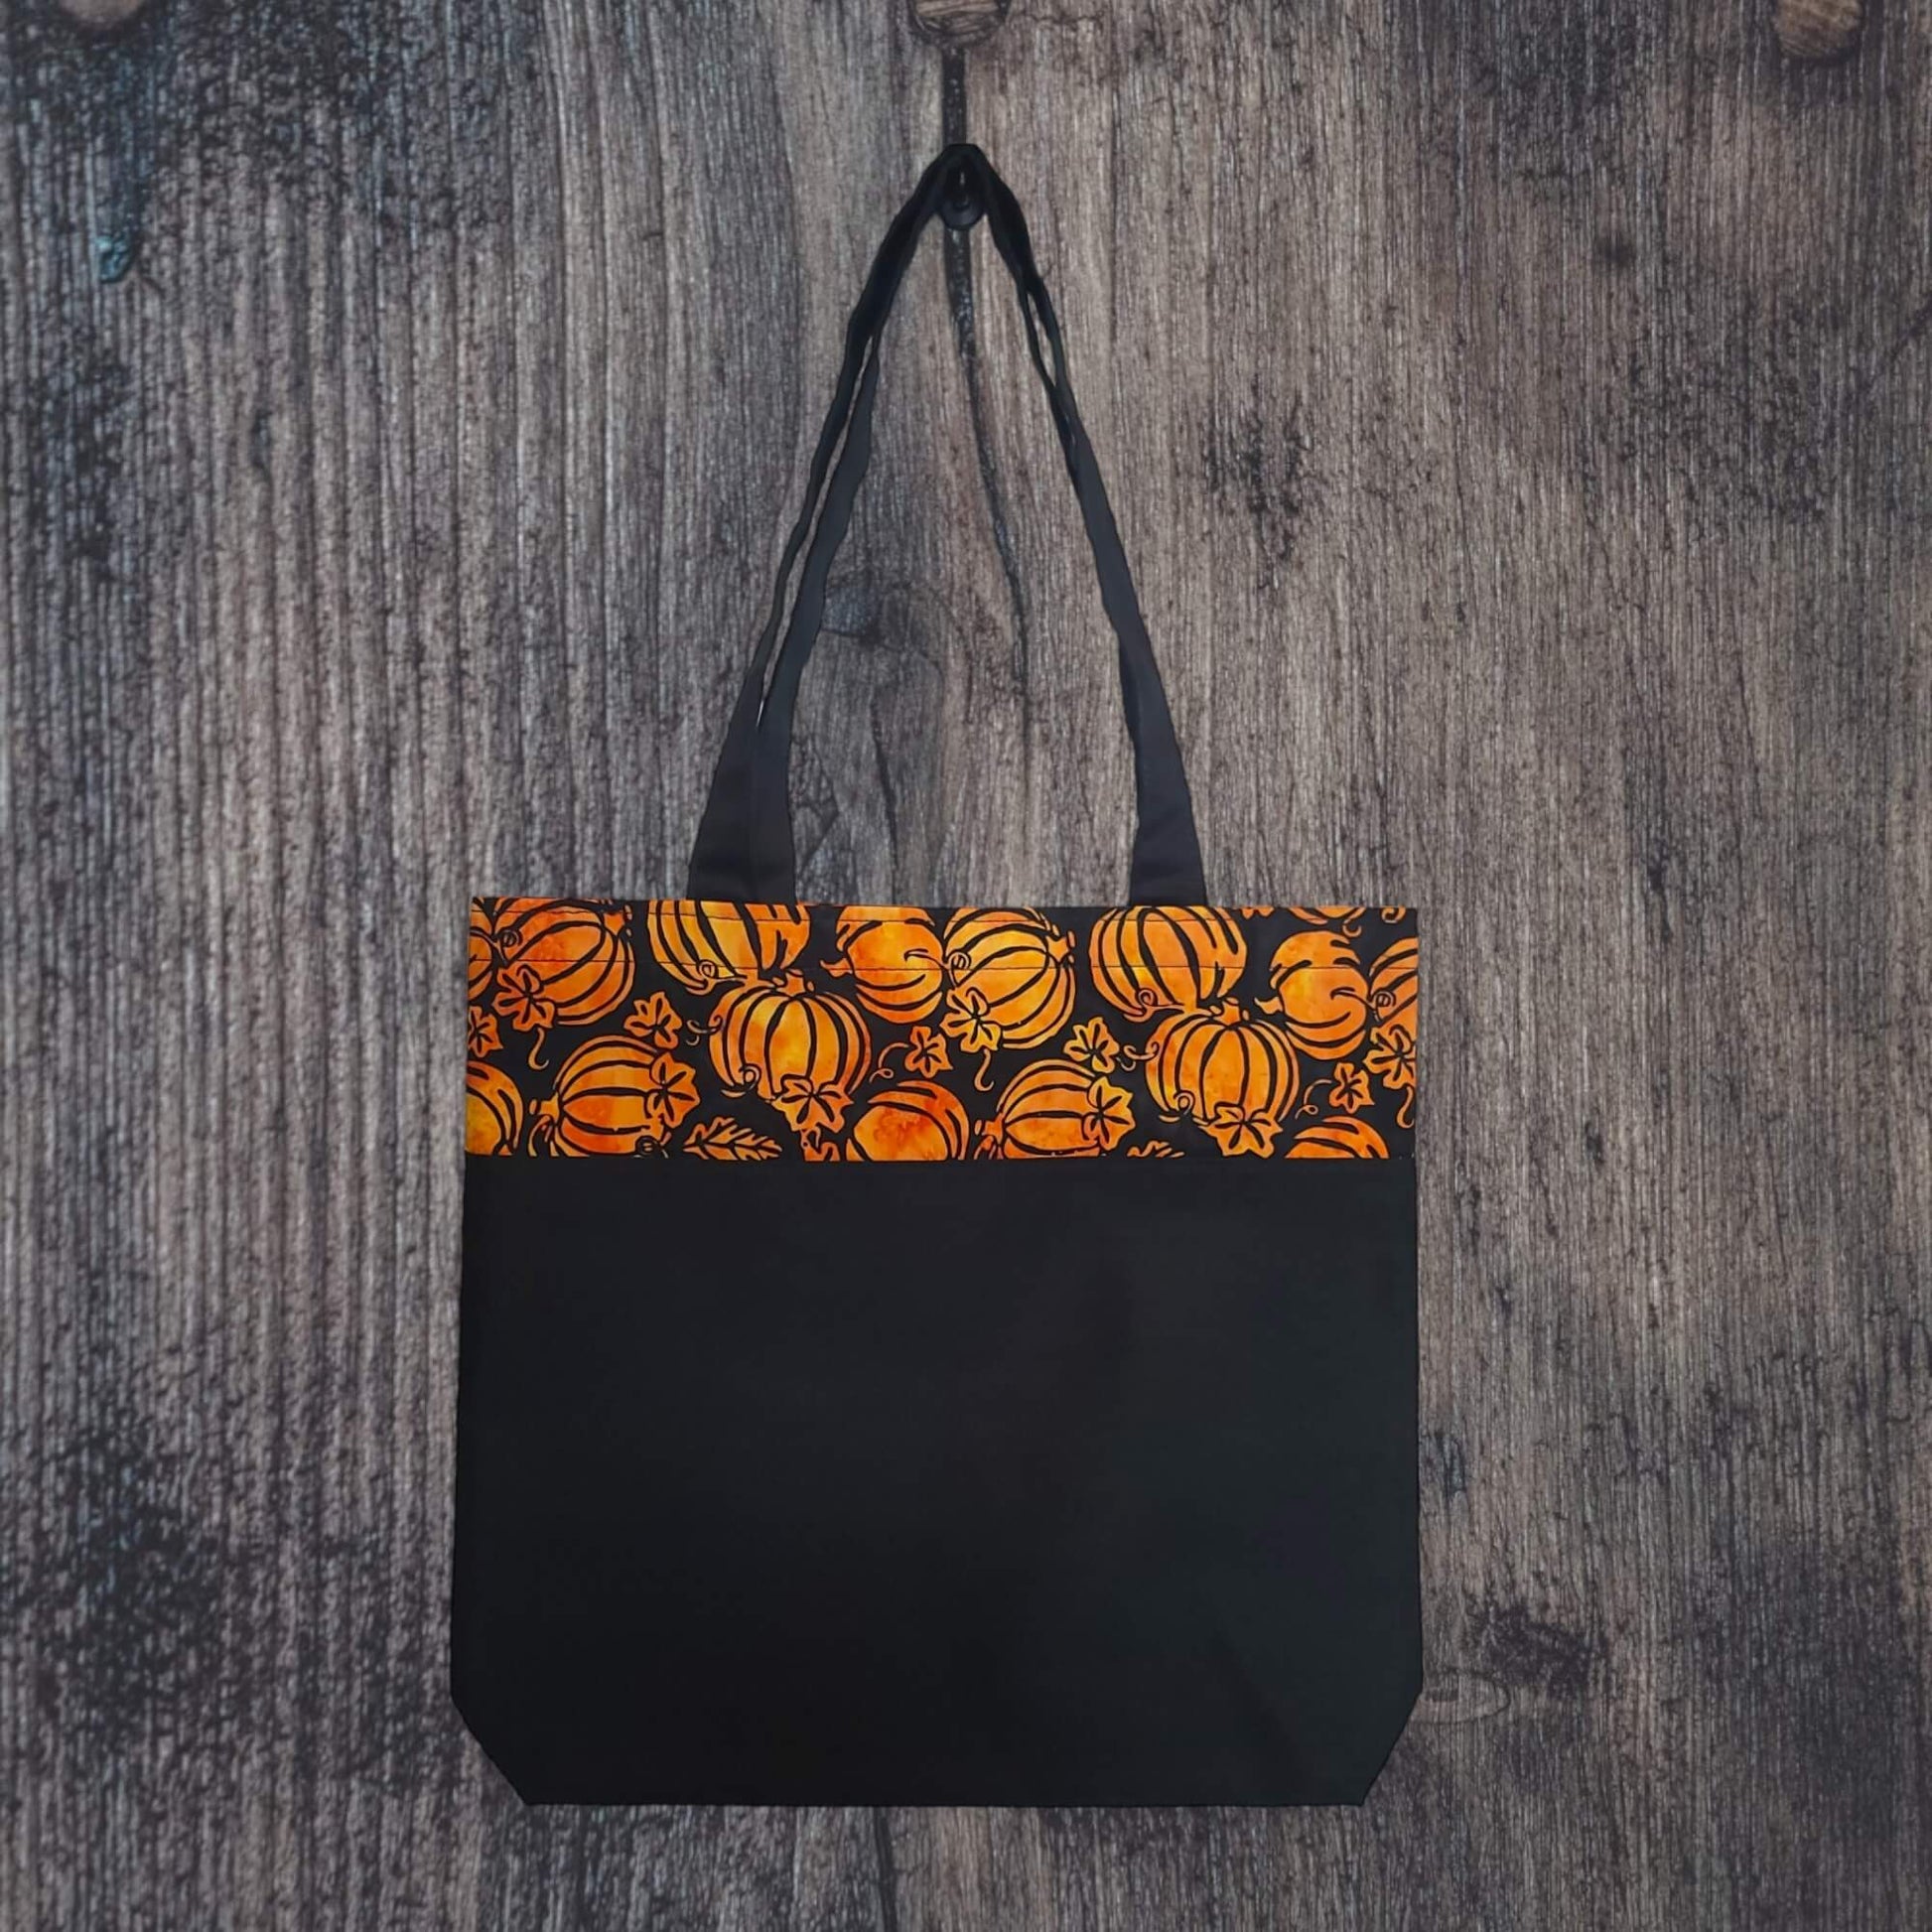 our accent tote bag featuring our Pottsfield pattern.